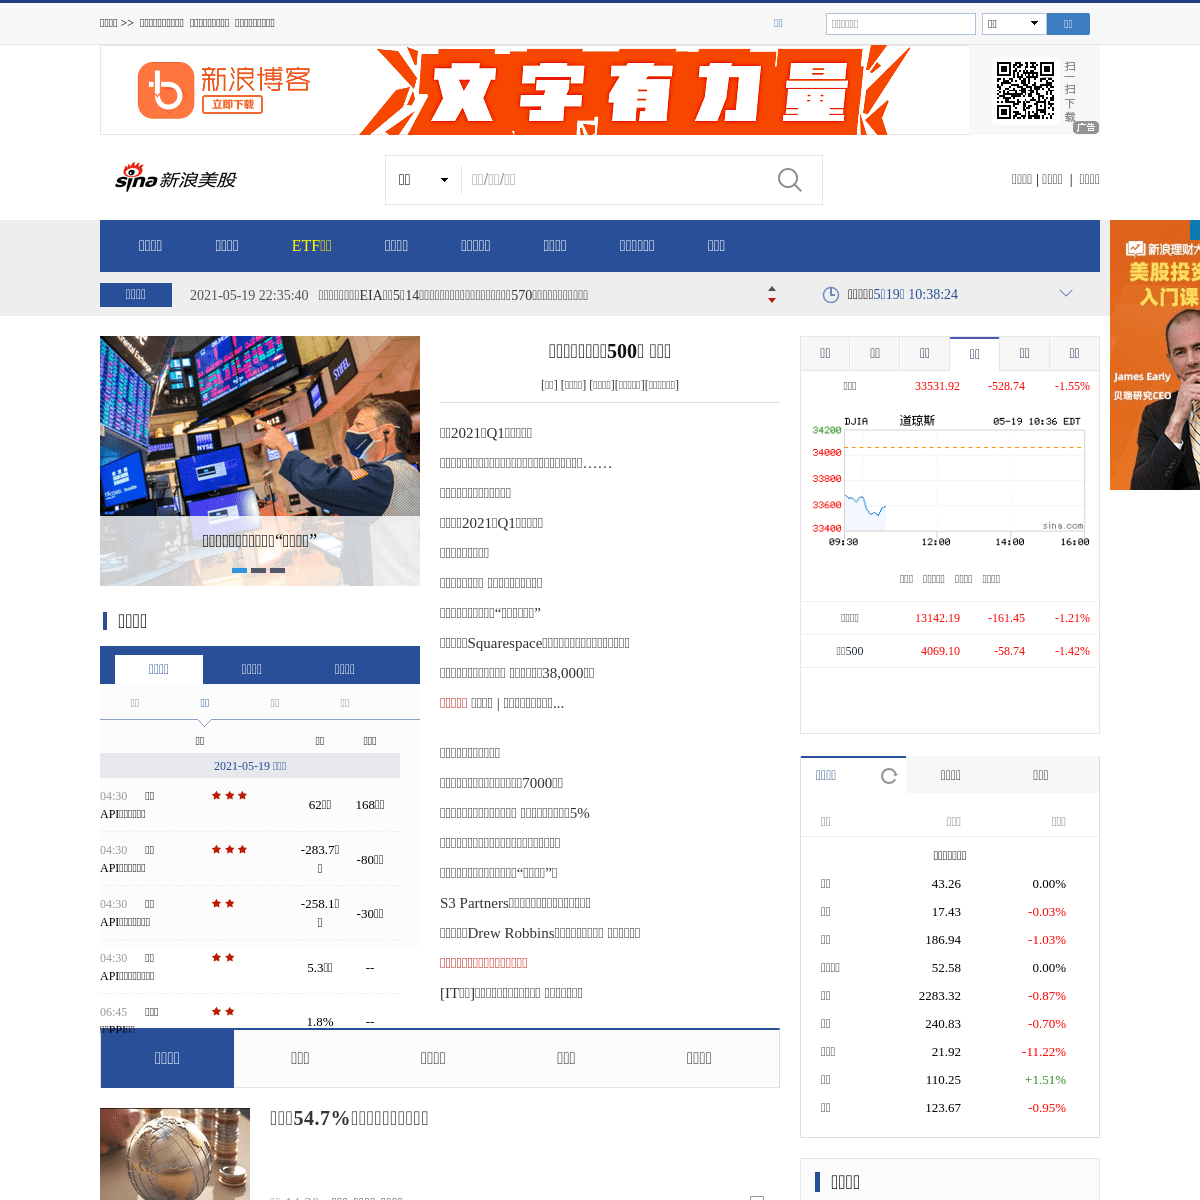 A complete backup of http://finance.sina.com.cn/stock/usstock/